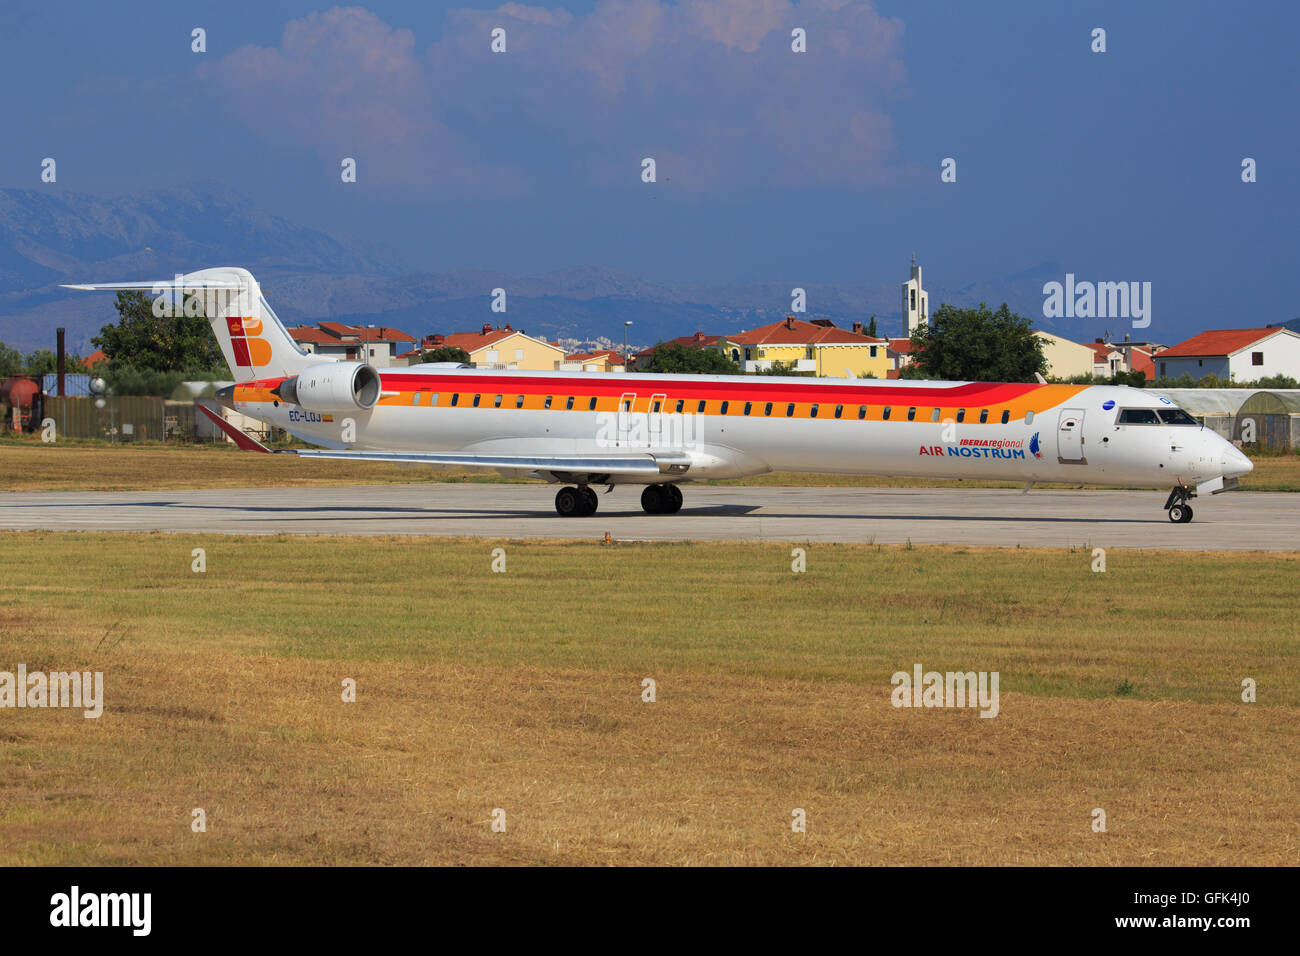 MADRID, SPAIN - MAY 15th 2016: Plane -Bombardier CRJ-1000- of -Air Nostrum- airline Stock Photo